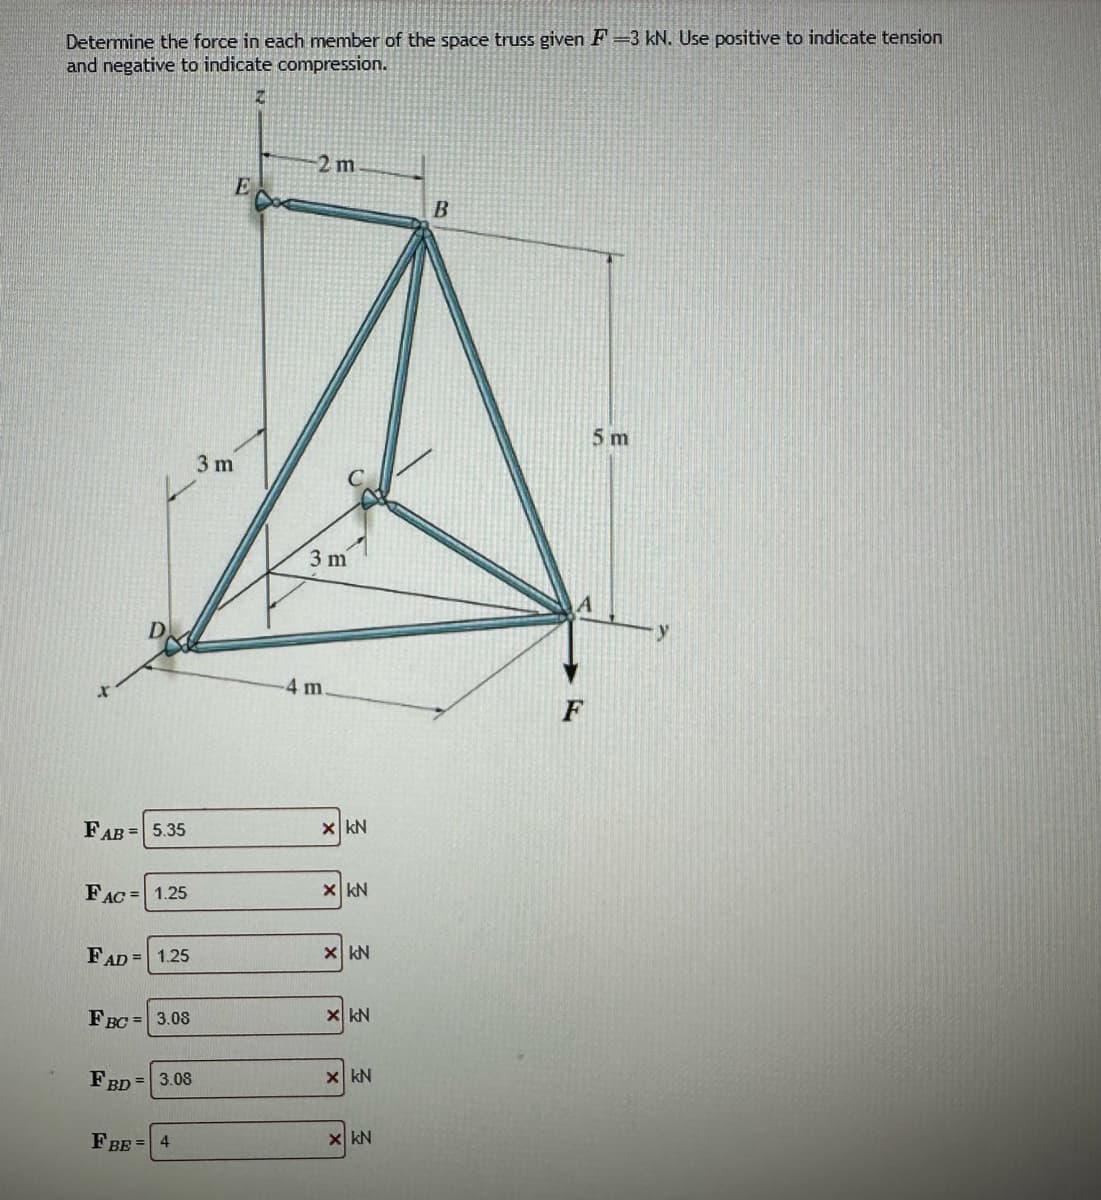 Determine the force in each member of the space truss given F-3 kN. Use positive to indicate tension
and negative to indicate compression.
Z
D
FAB= 5.35
FAC = 1.25
FAD = 1.25
FBC= 3.08
FBD = 3.08
FBE = 4
3 m
E
2 m
3 m
4 m.
x kN
X KN
X KN
x kN
x kN
X KN
B
5 m
A
F
y